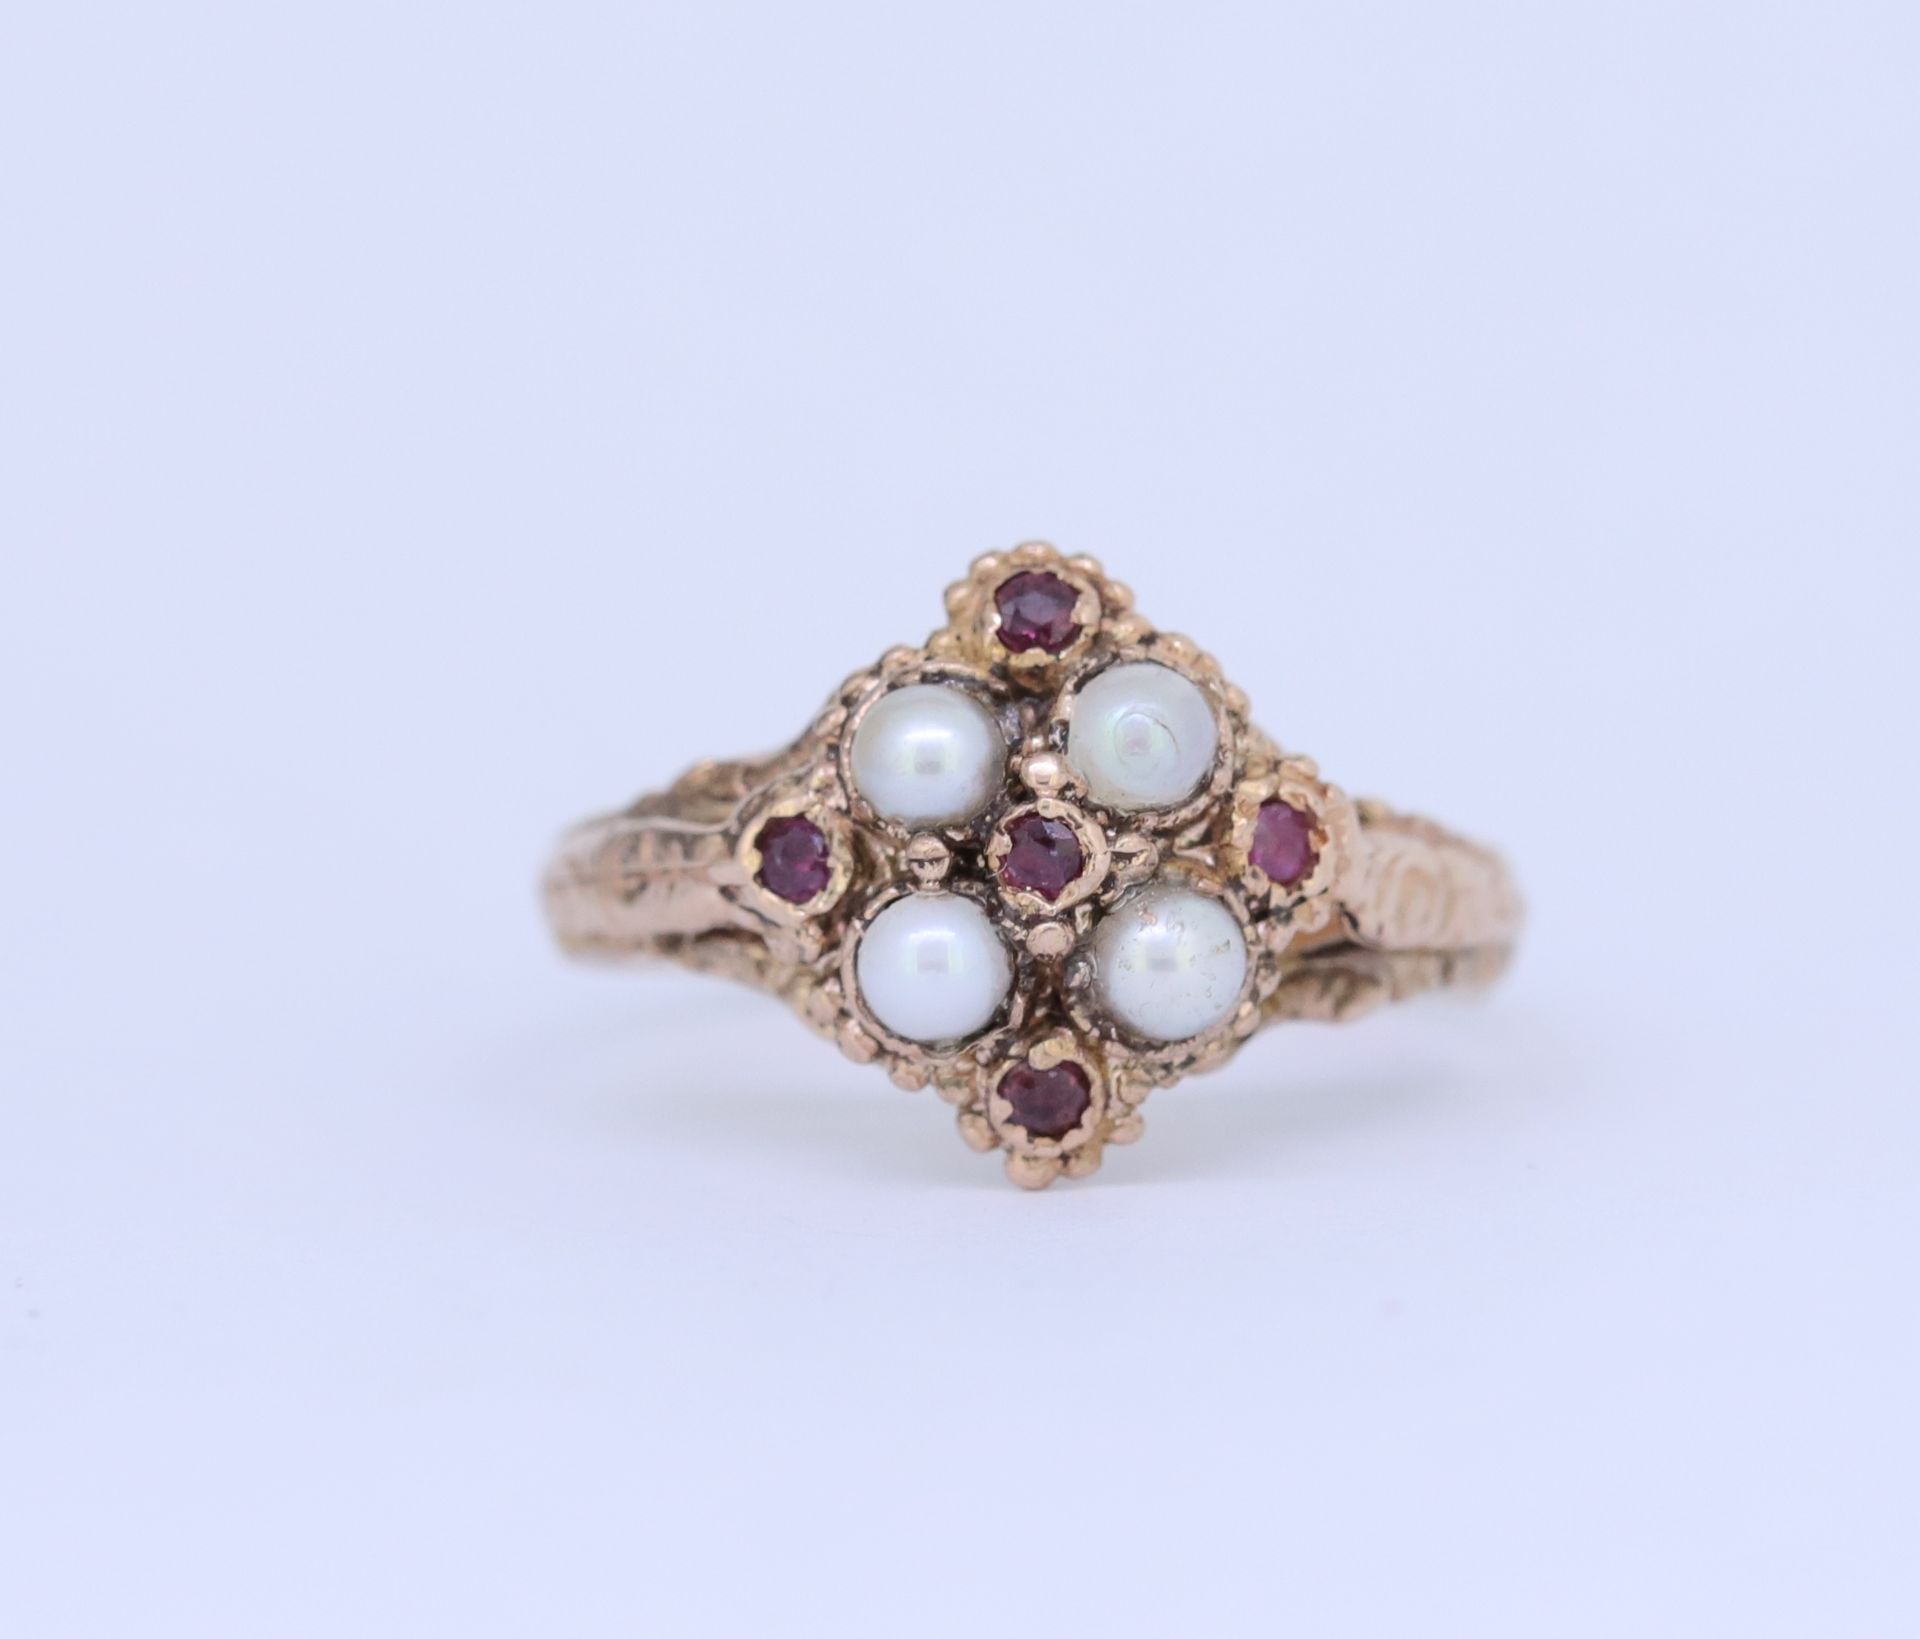 ANTIQUE RUBY AND PEARL RING